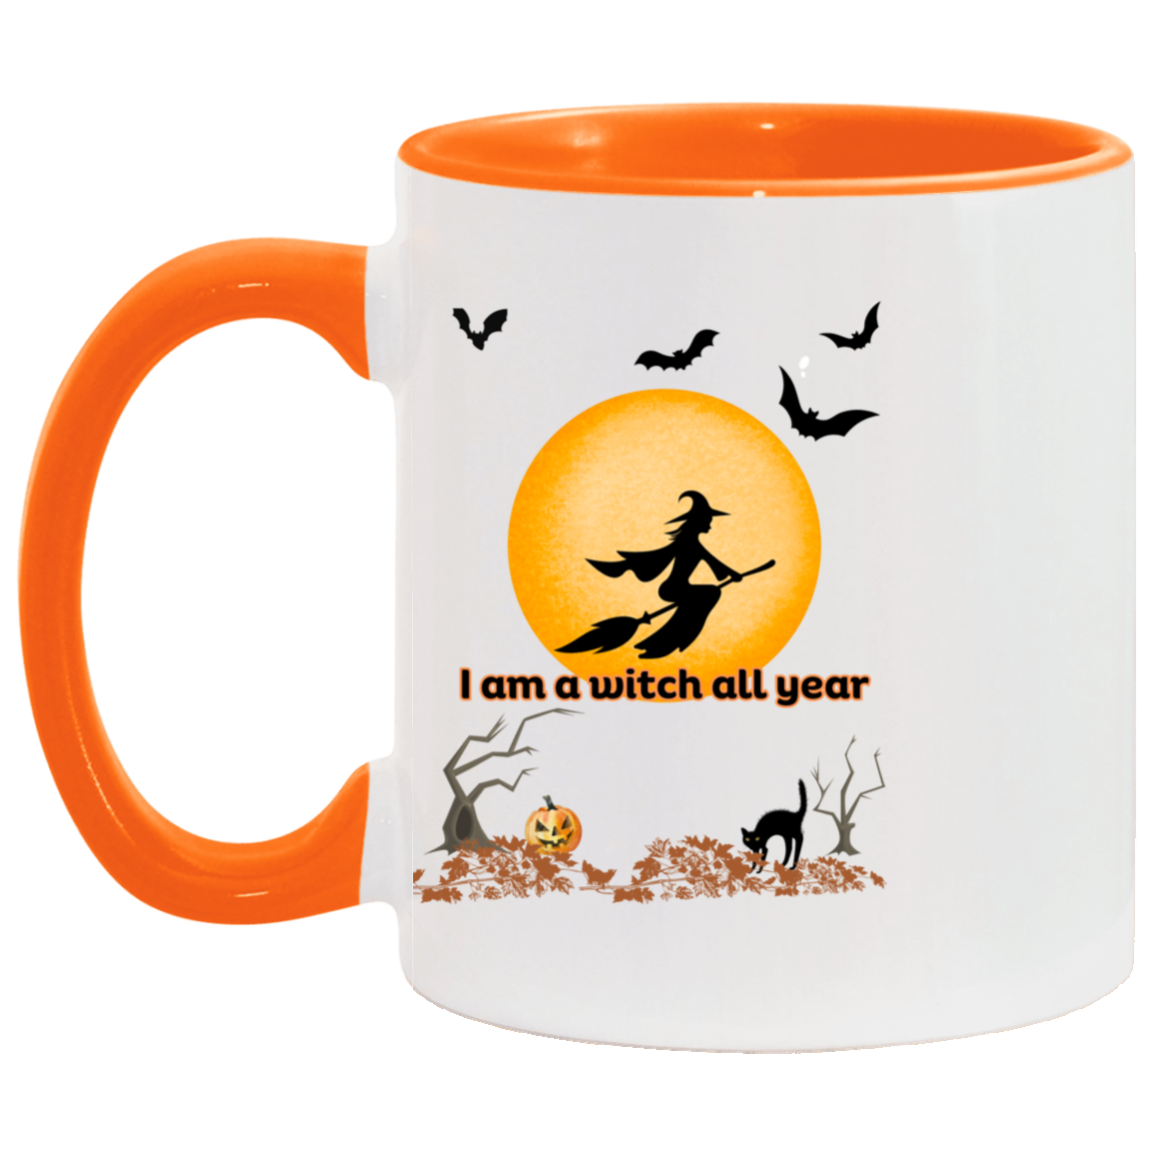 Get trendy with I am a Witch all Year 11 oz. Accent Mug - Drinkware available at Good Gift Company. Grab yours for $16.95 today!